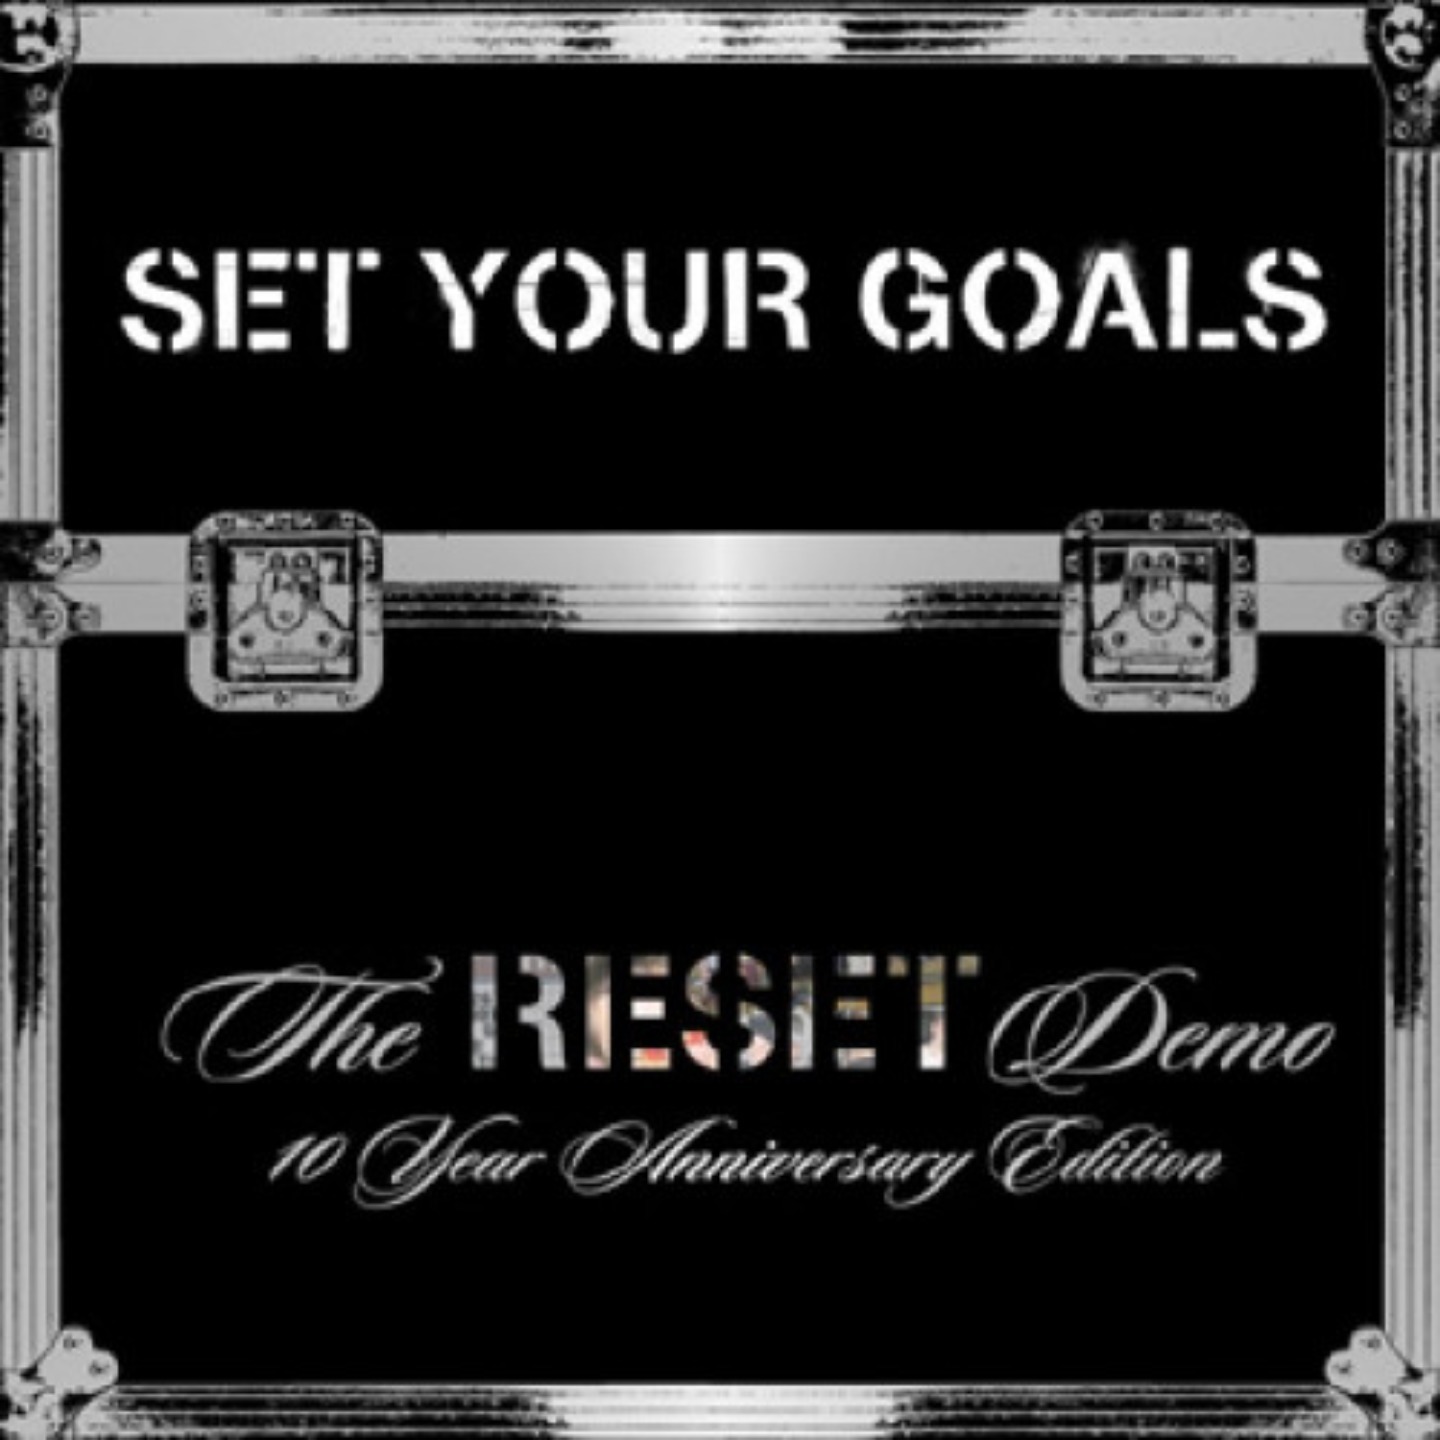 SET YOUR GOALS - The Reset Demo 10 Year Edition 10